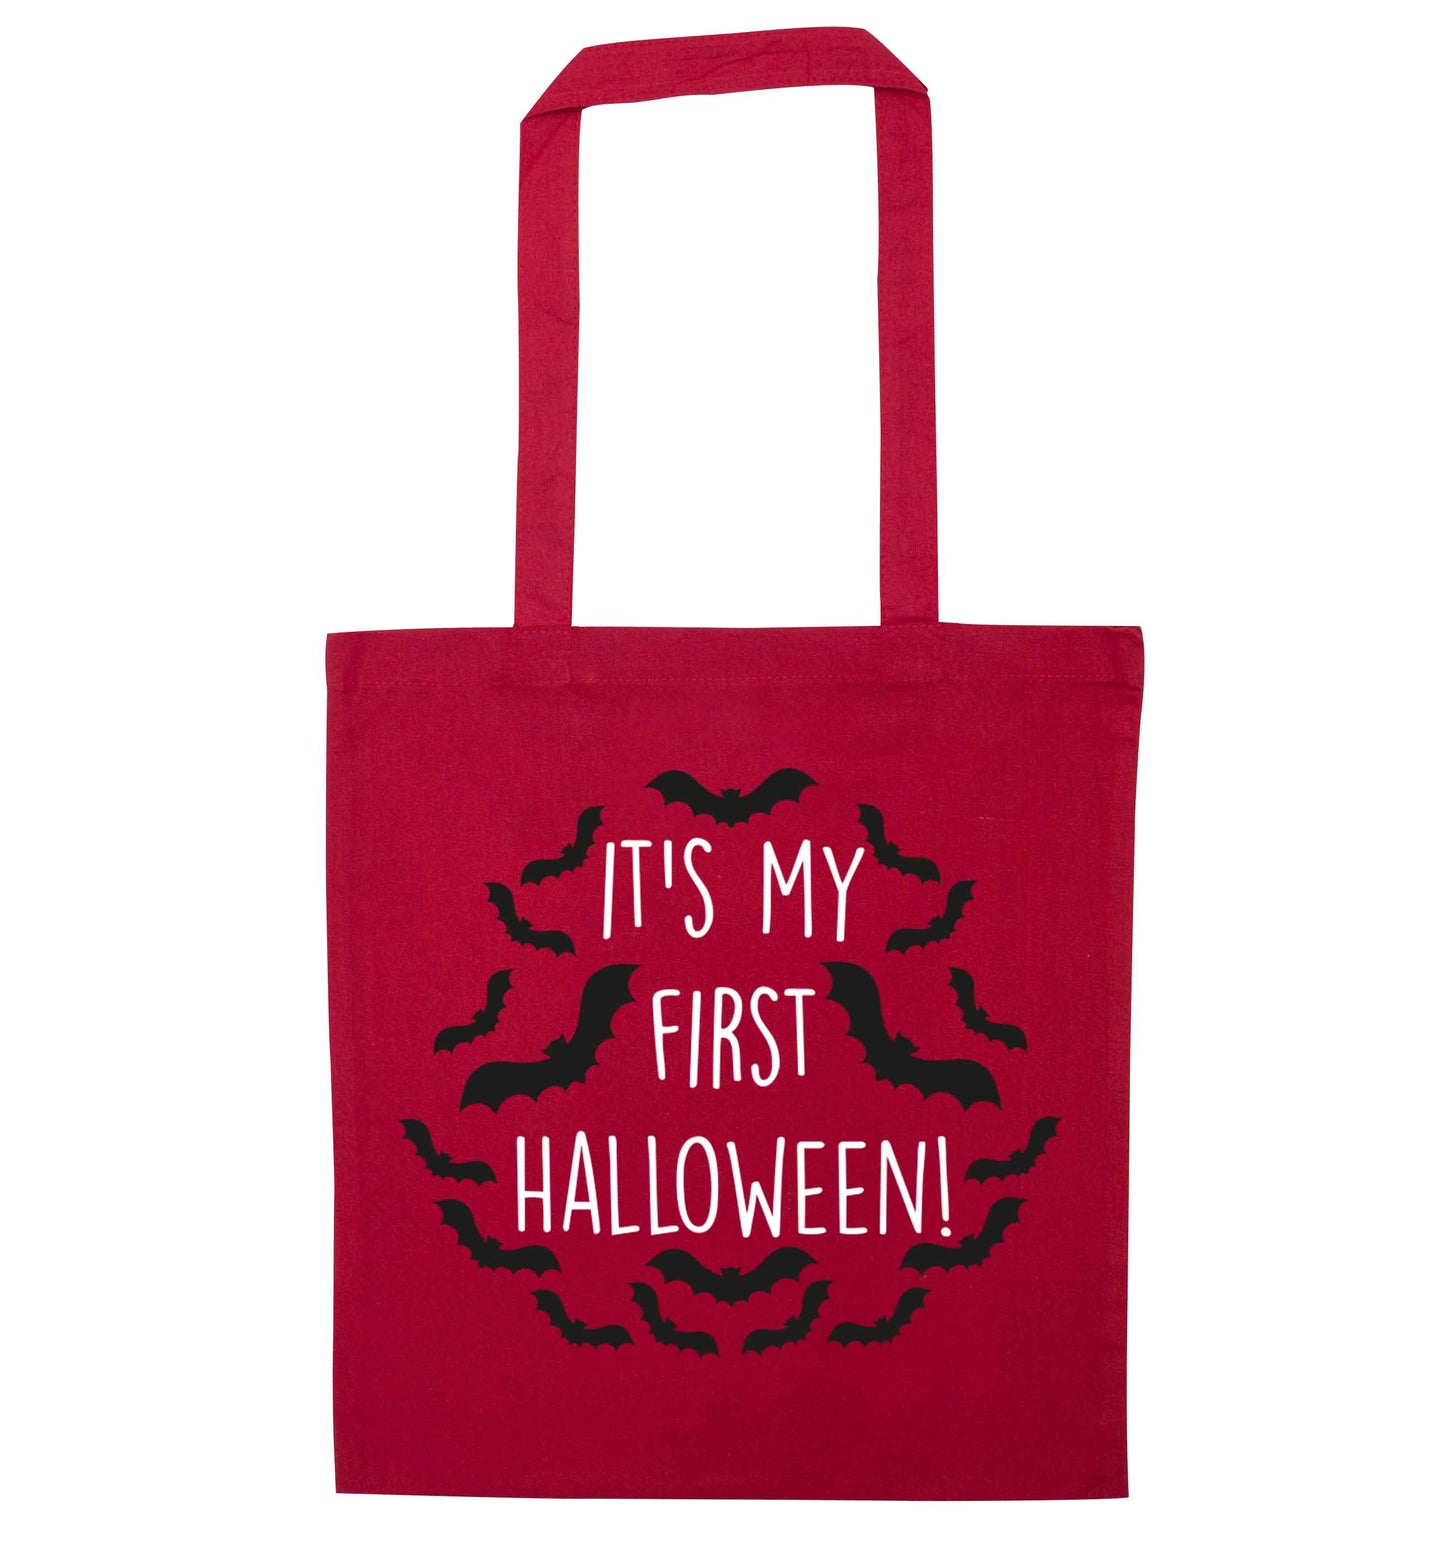 It's my first halloween - bat border red tote bag